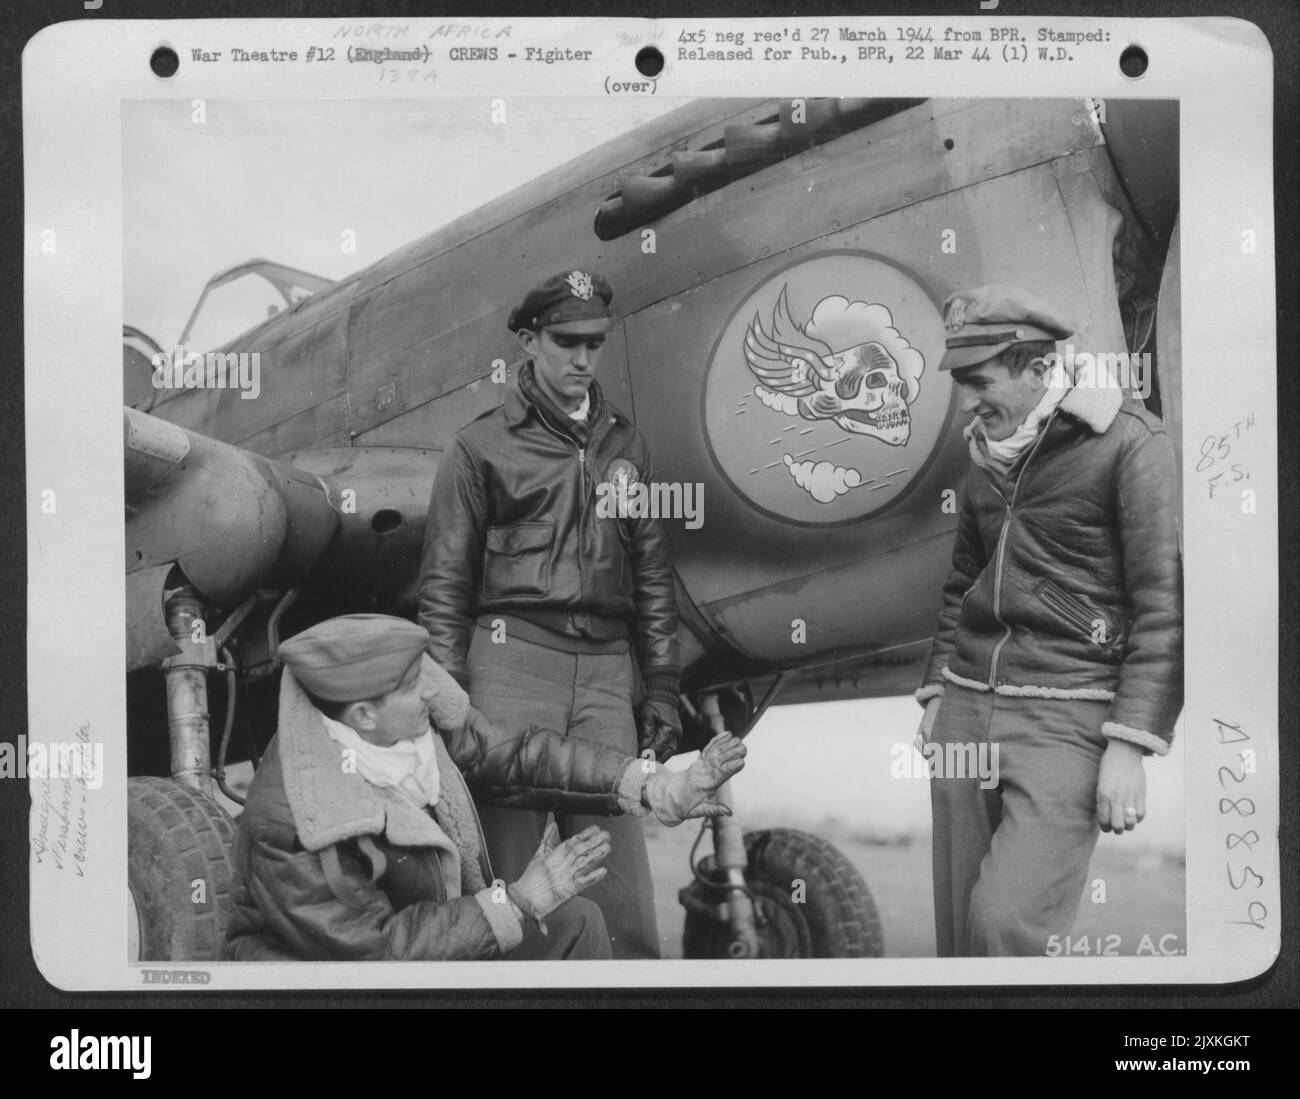 'Flying Skull' Squadron pilots telling each other how they knocked down one enemy aircraft apiece. .. Left to right: Lt. Robert J. Duffield, 24, Cleveland Heights, Ohio--- shot down an FW 190 to make his 2nd victory; Lt. Raymond Higgins, 20 Stock Photo